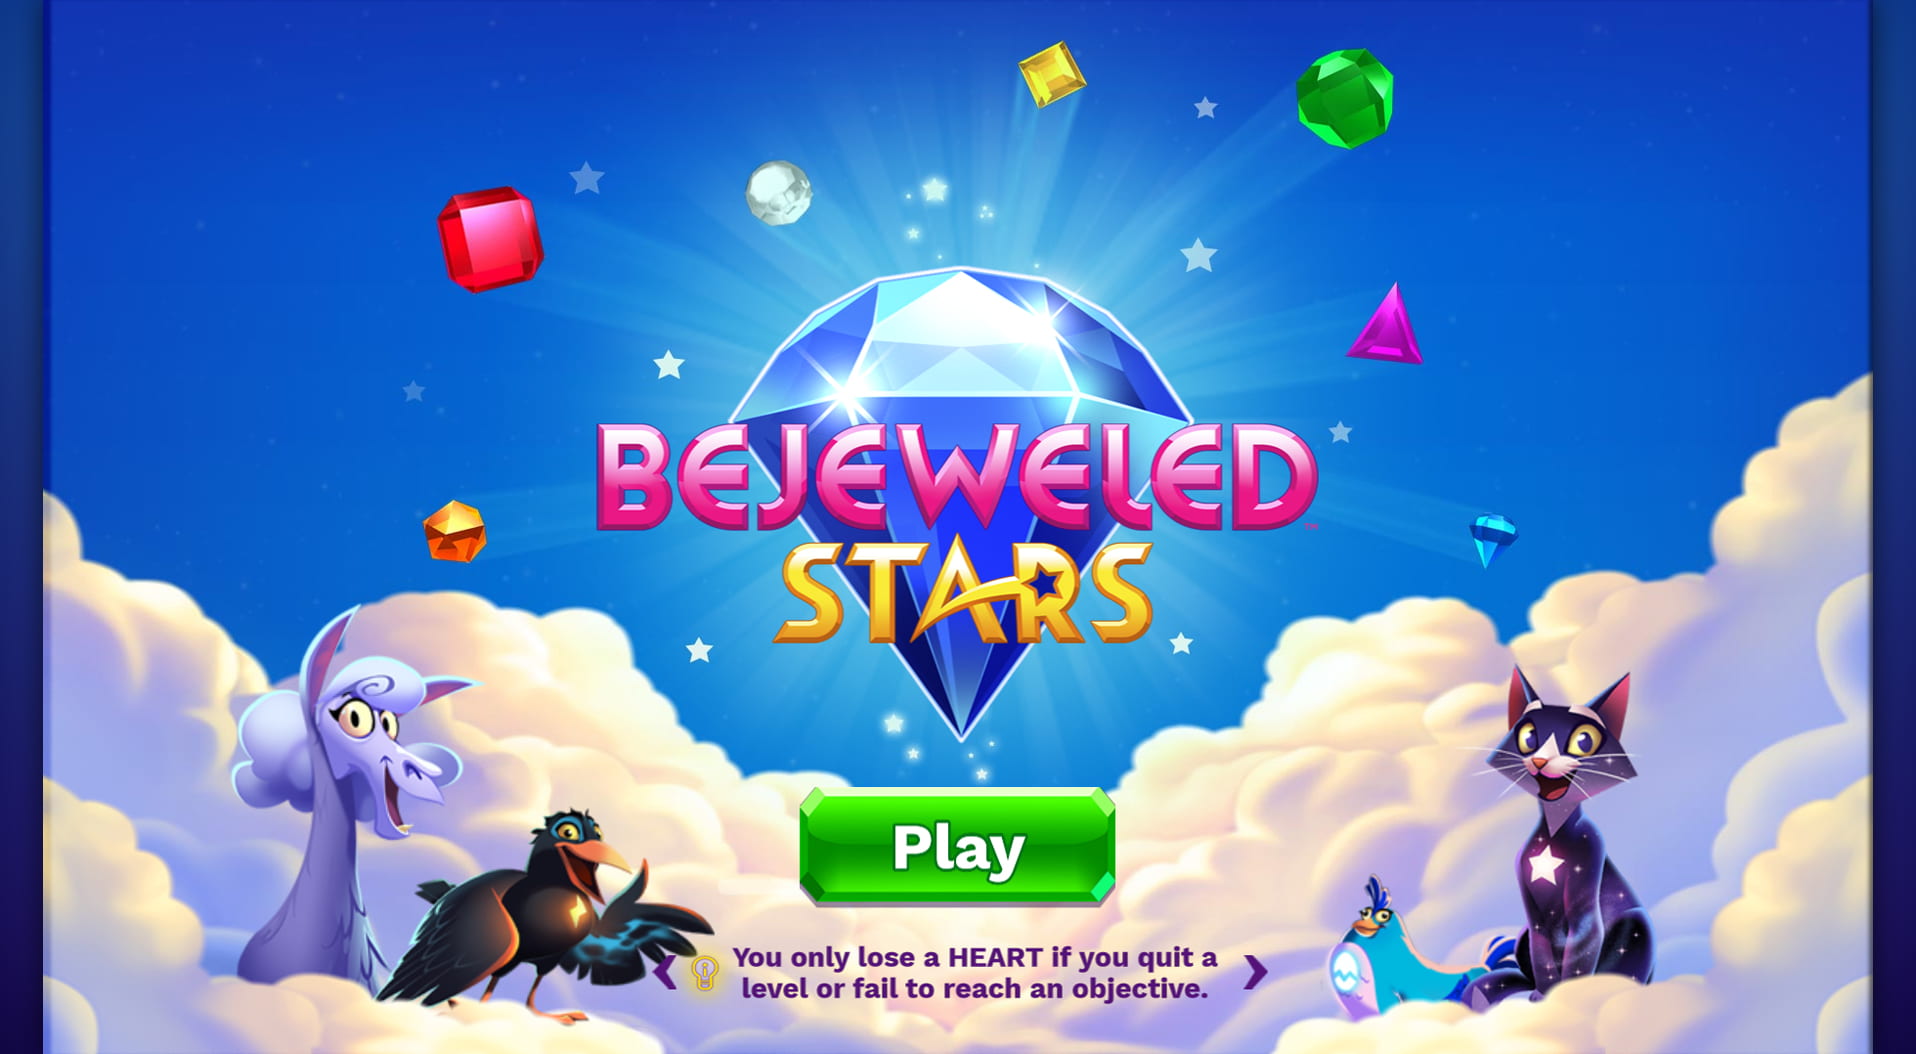 Bejeweled Stars, Free Online Match 3 Game